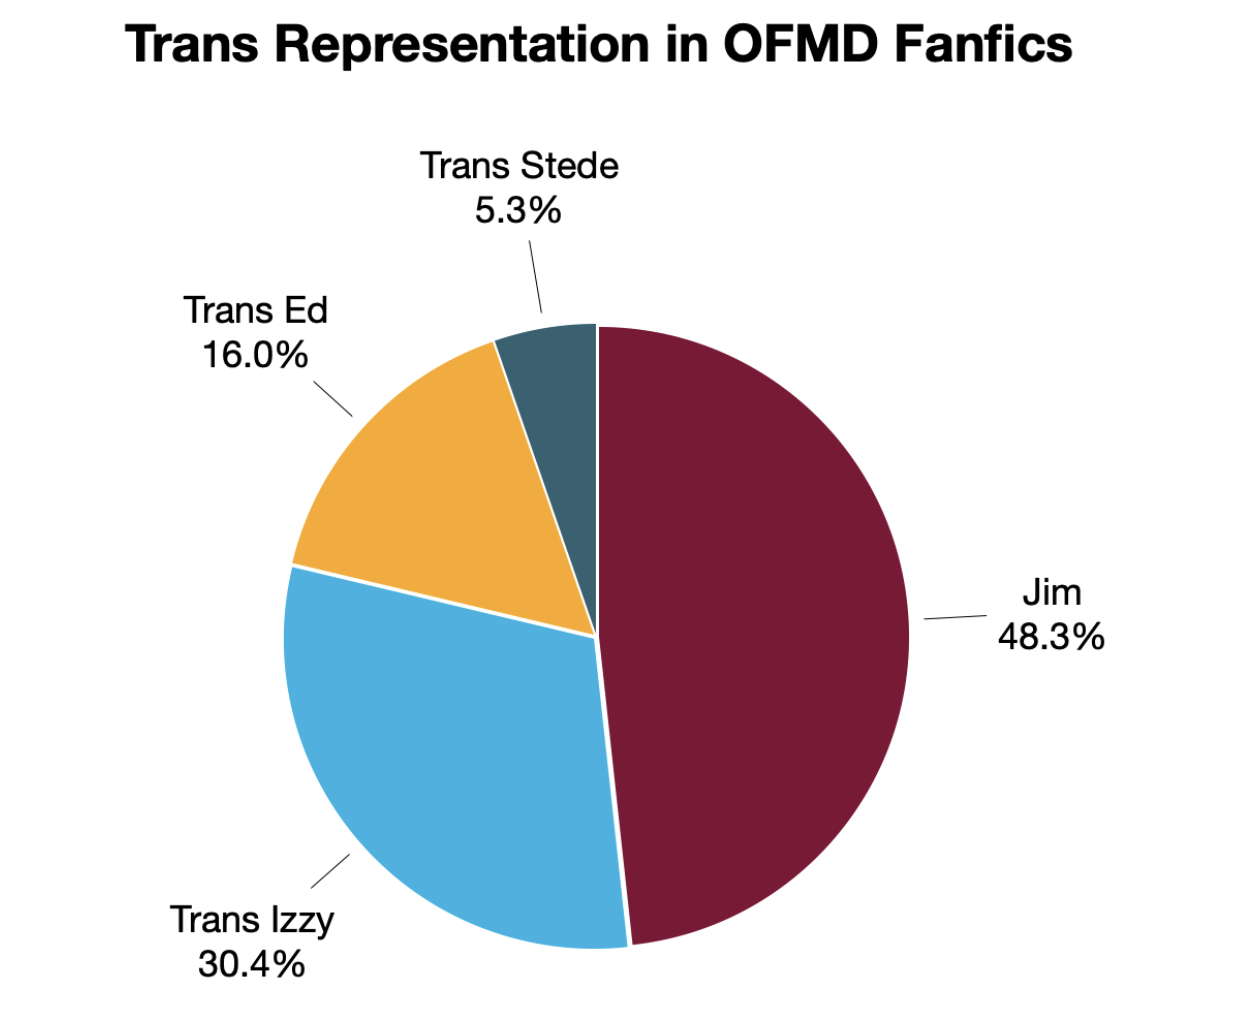 Pie chart of trans characters and how often they appear in OFMD fanfics.